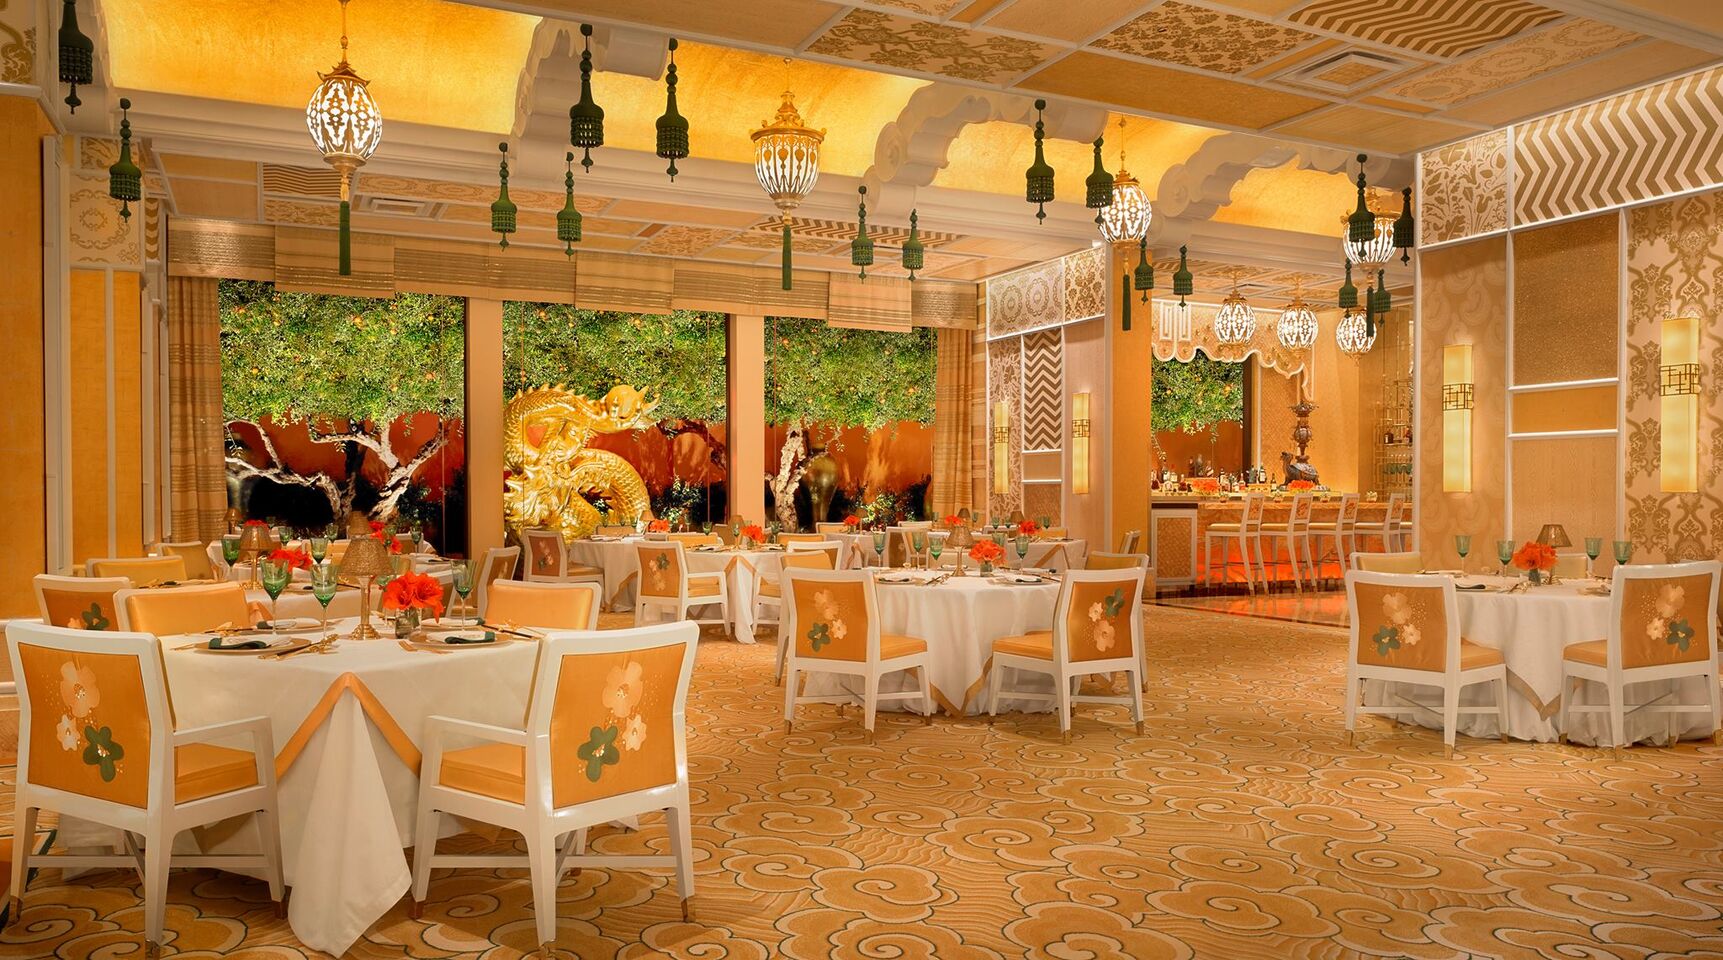 A photo of WIng Lei at Wynn